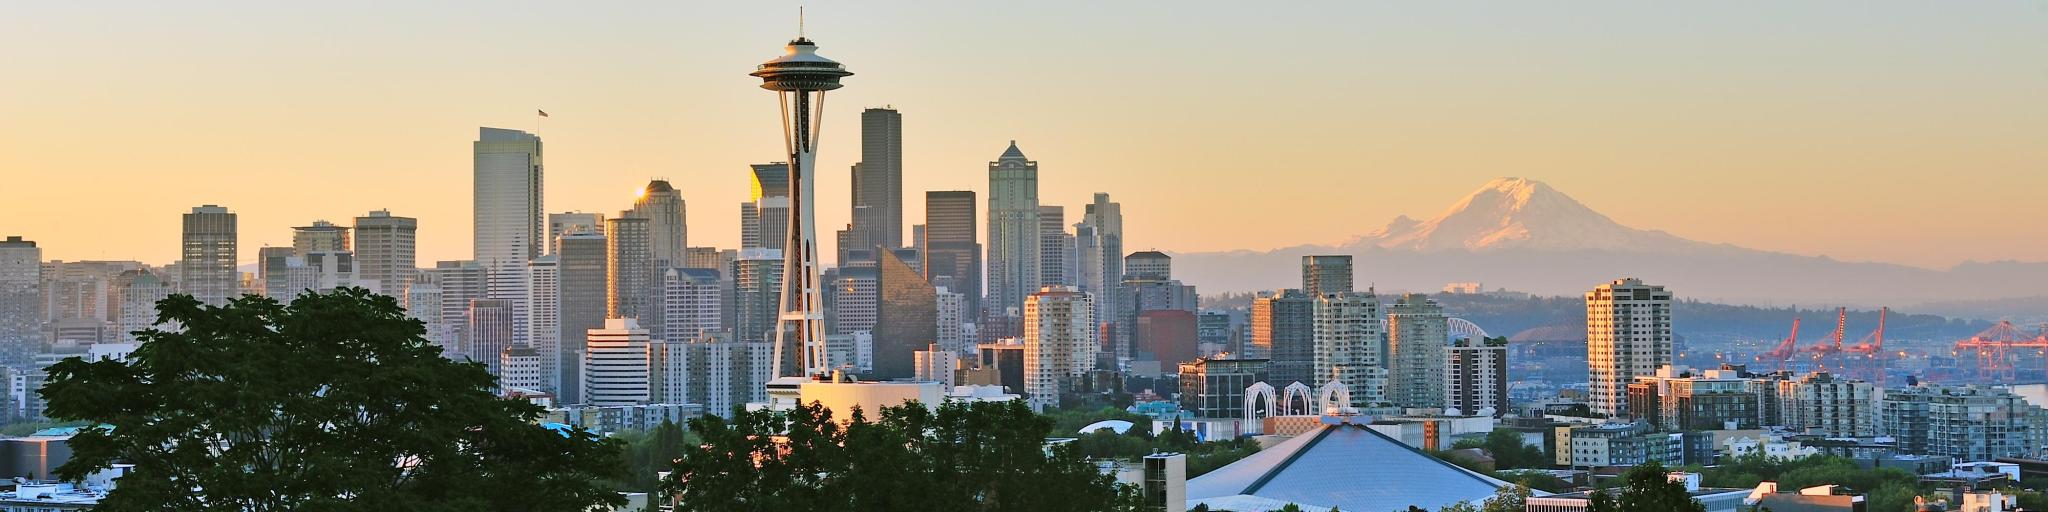 Seattle, Washington State, USA with a view of Space Needle and Seattle skyline at sunrise from Kerry Park.